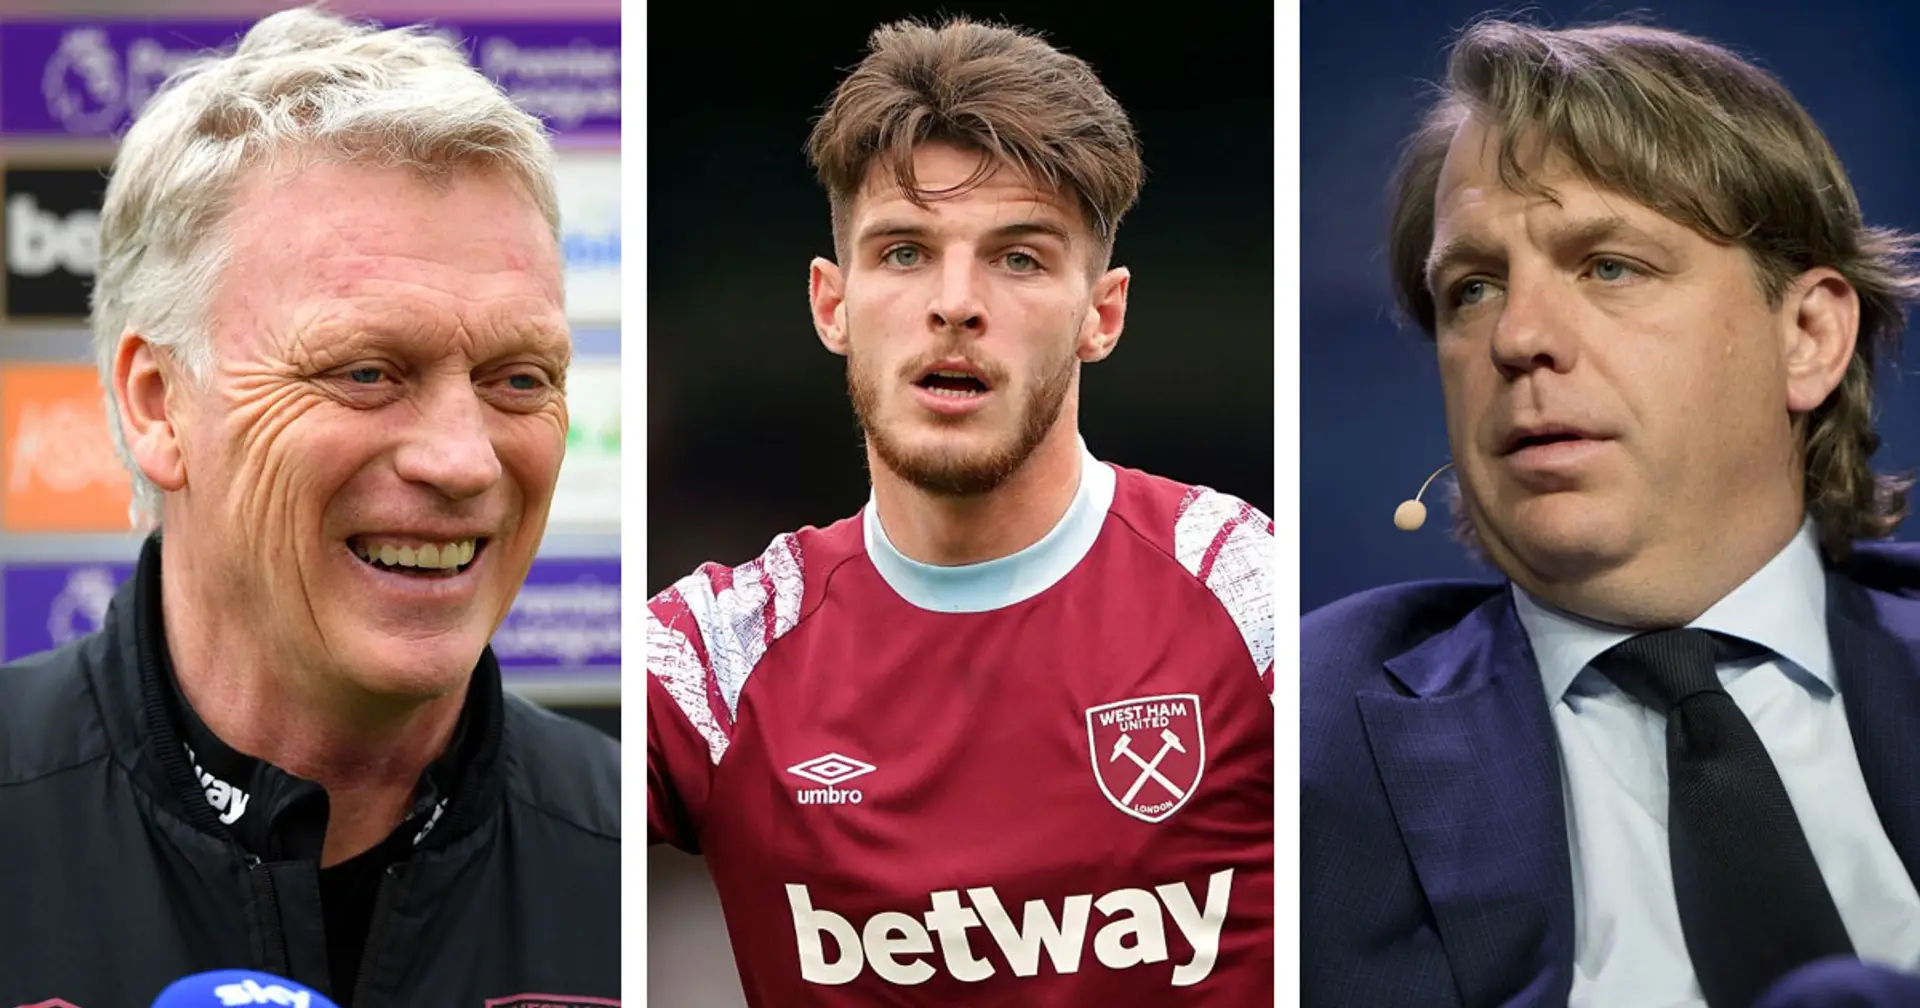 'We are not going to roll over’: David Moyes send defiant message over Declan Rice's future amid Chelsea links